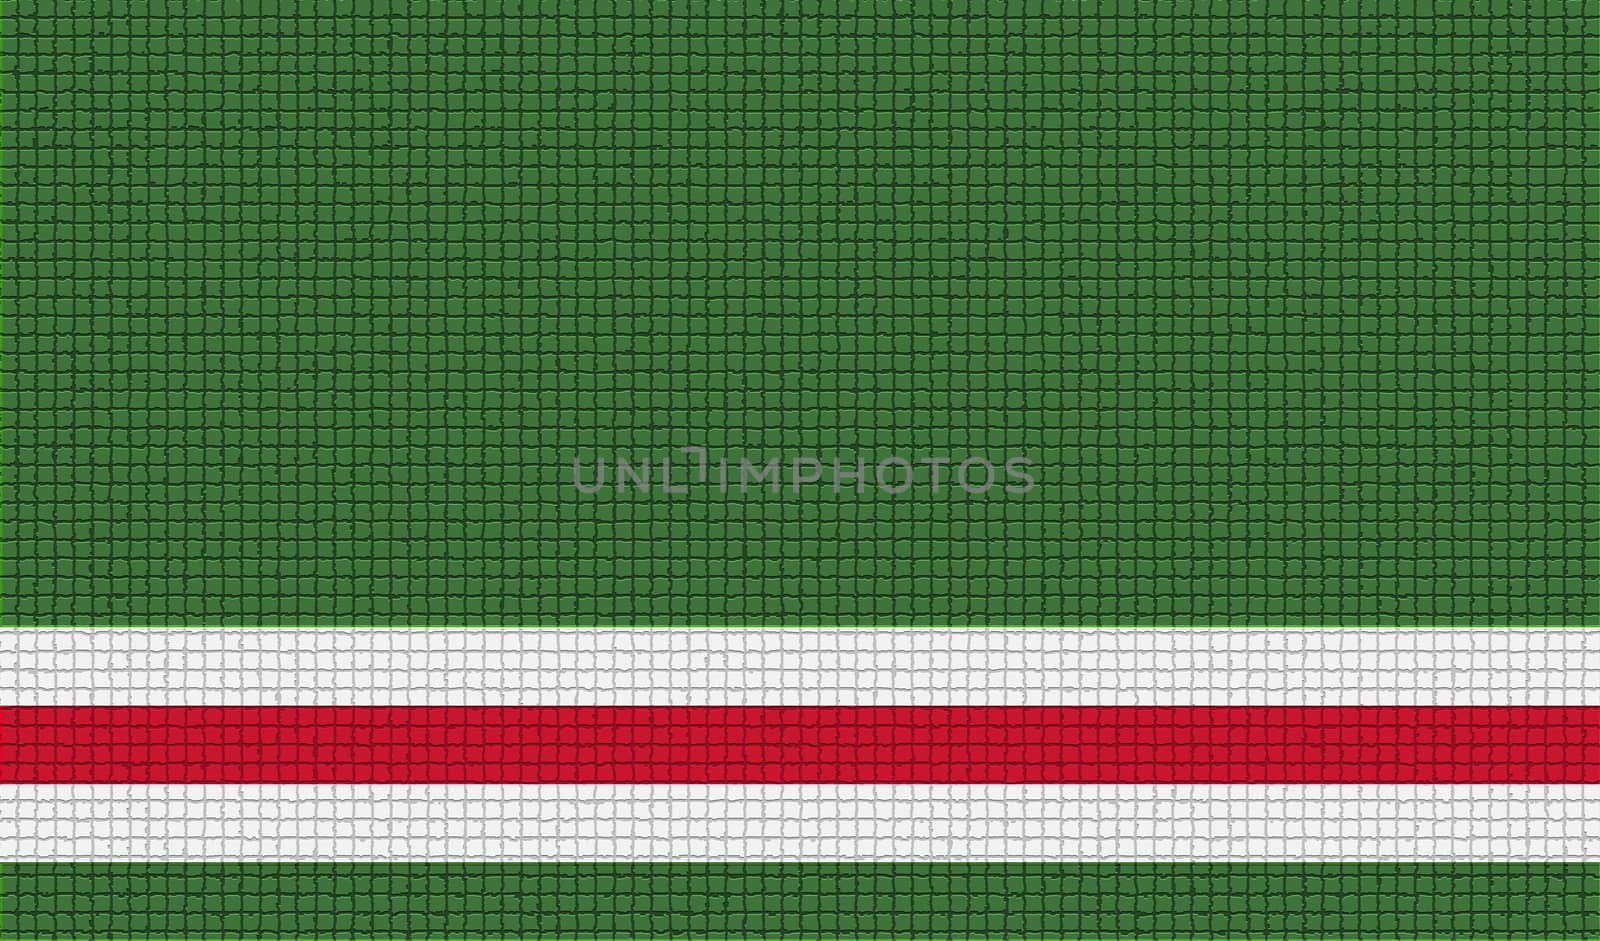 Flags Chechen Republic of Ichke with abstract textures. Rasterized by serhii_lohvyniuk